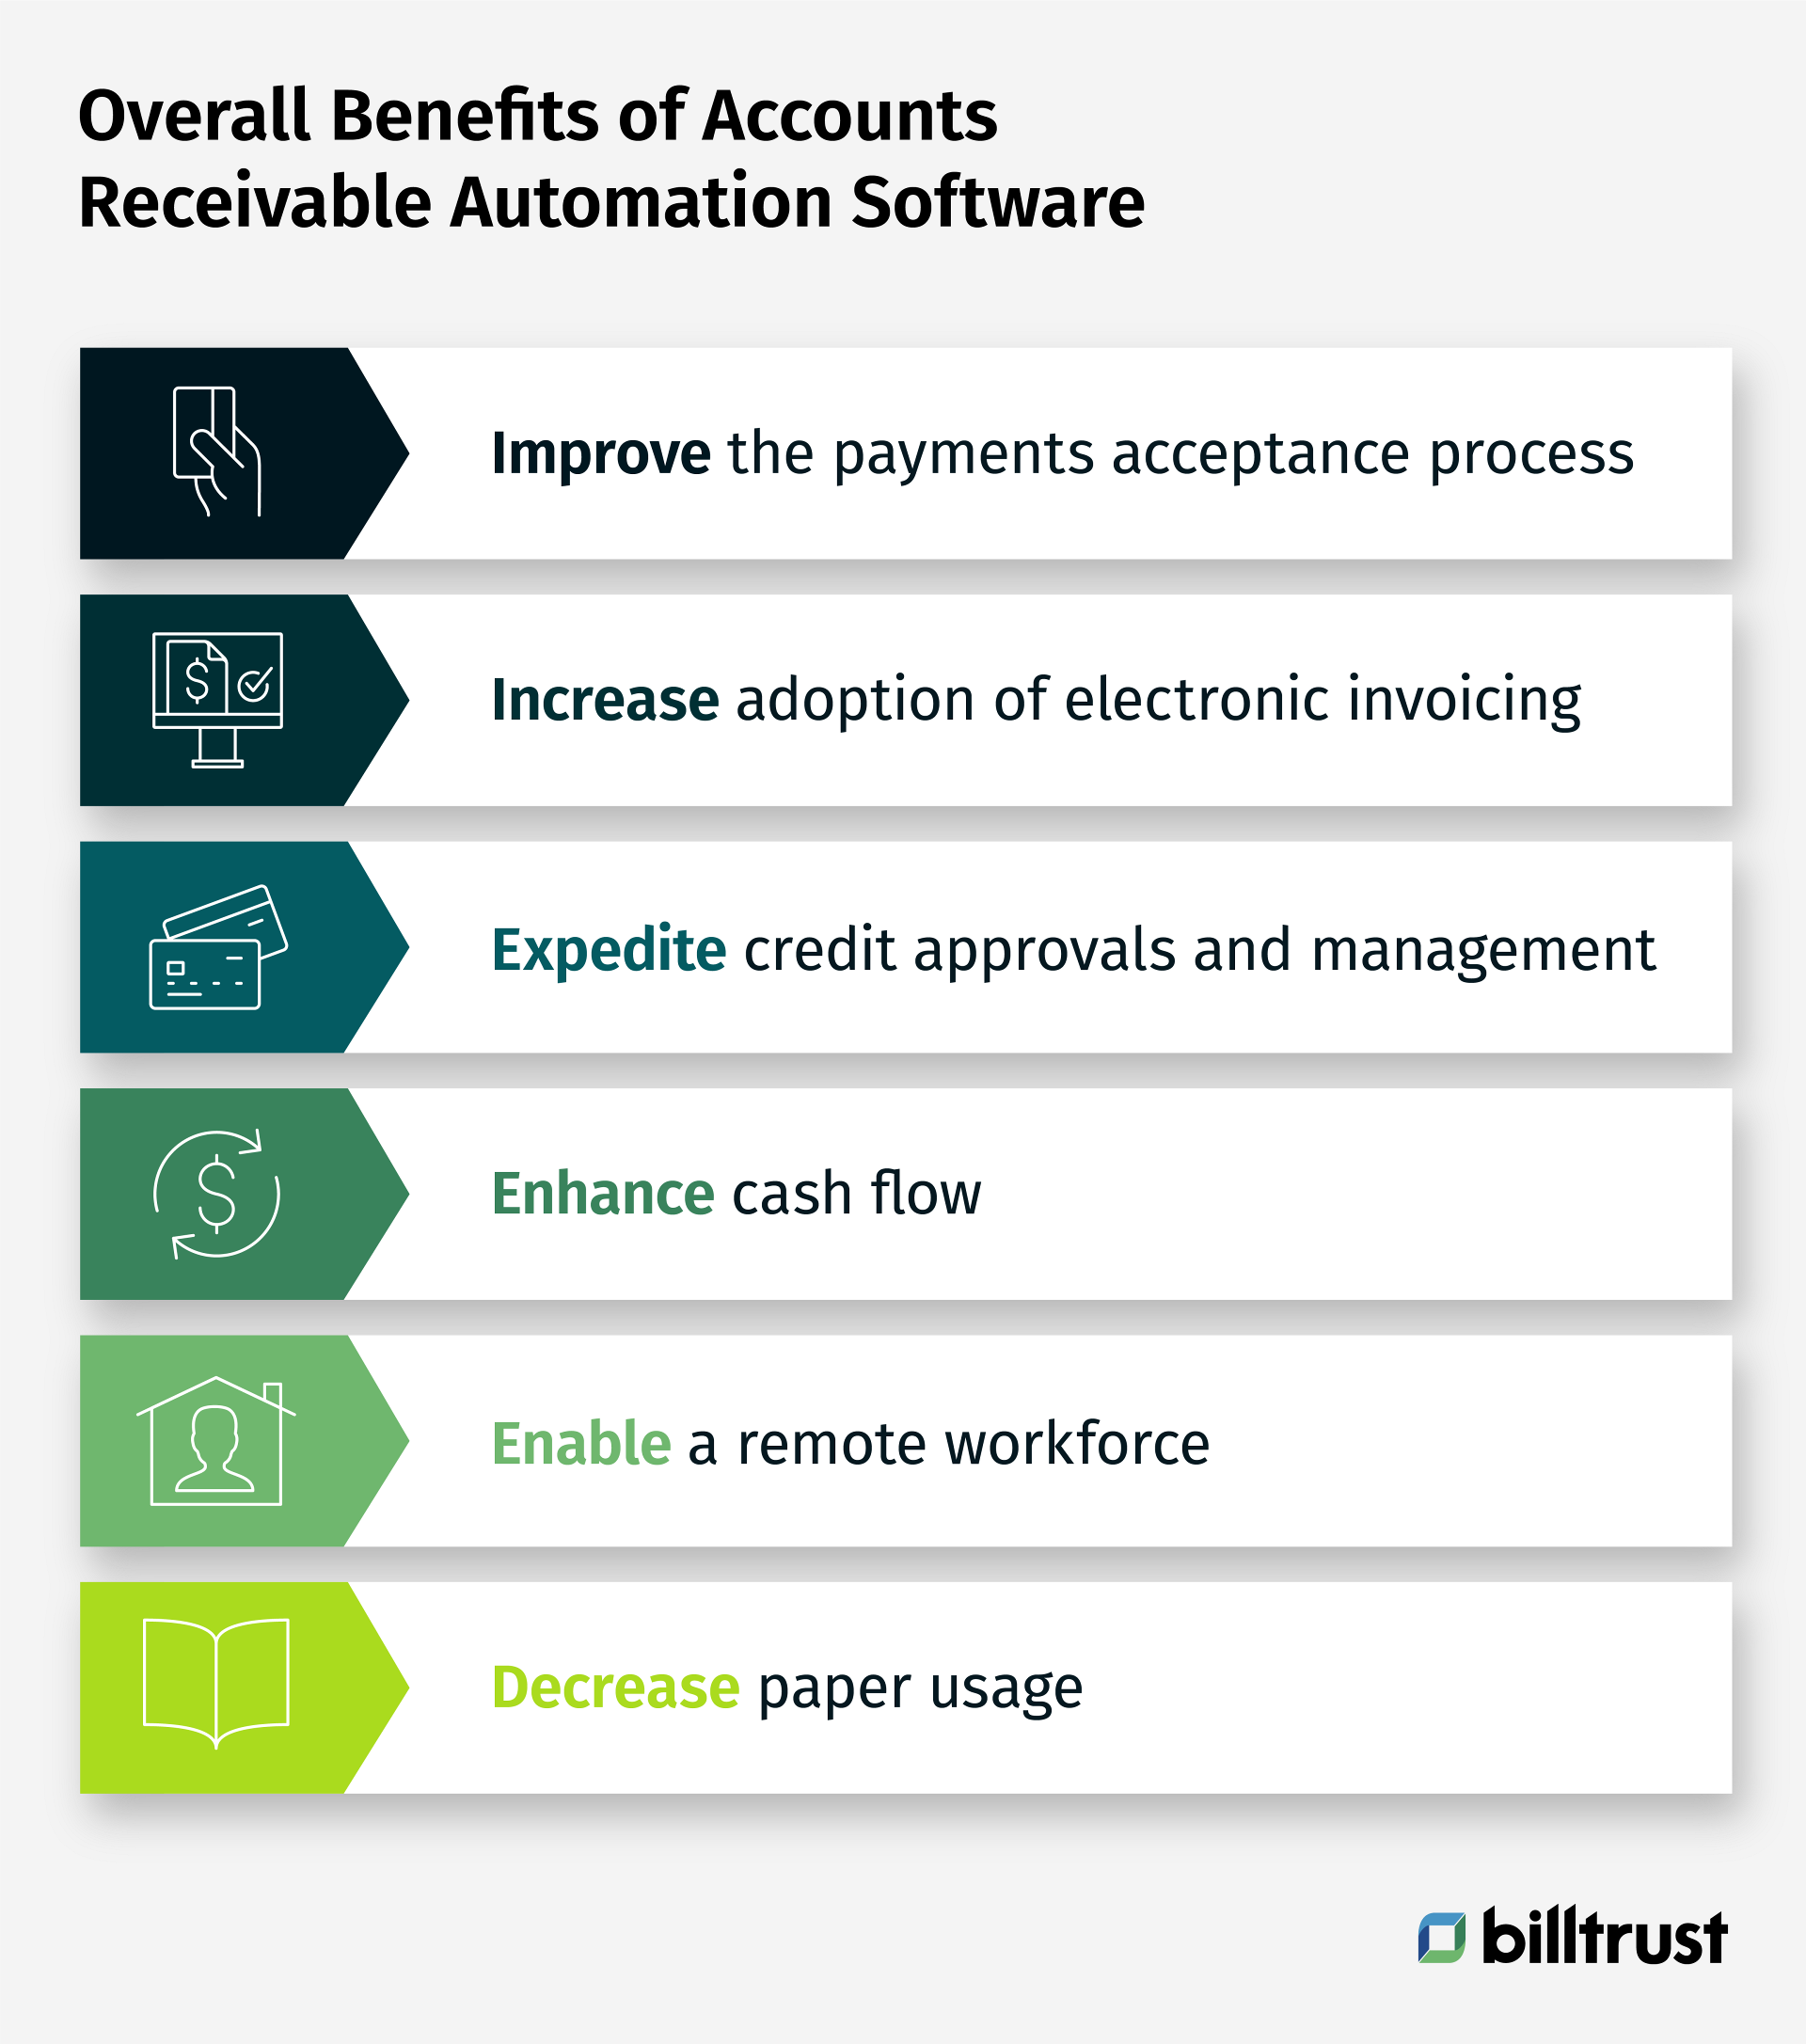 overall benefits of accounts receivable (AR) software